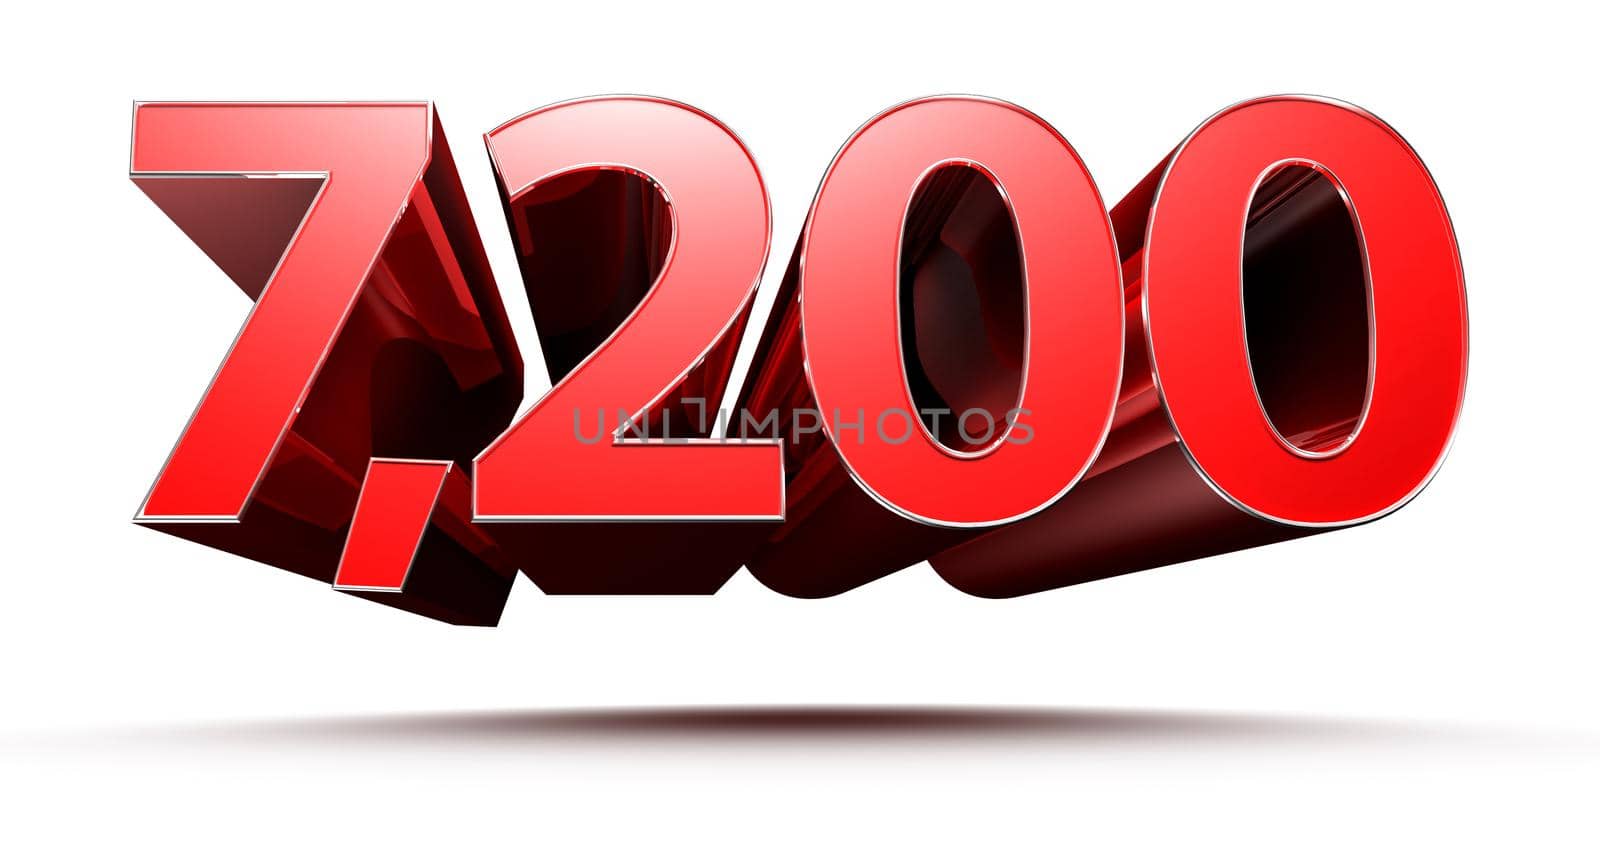 Number 7200 3D illustration on white background with clipping path.